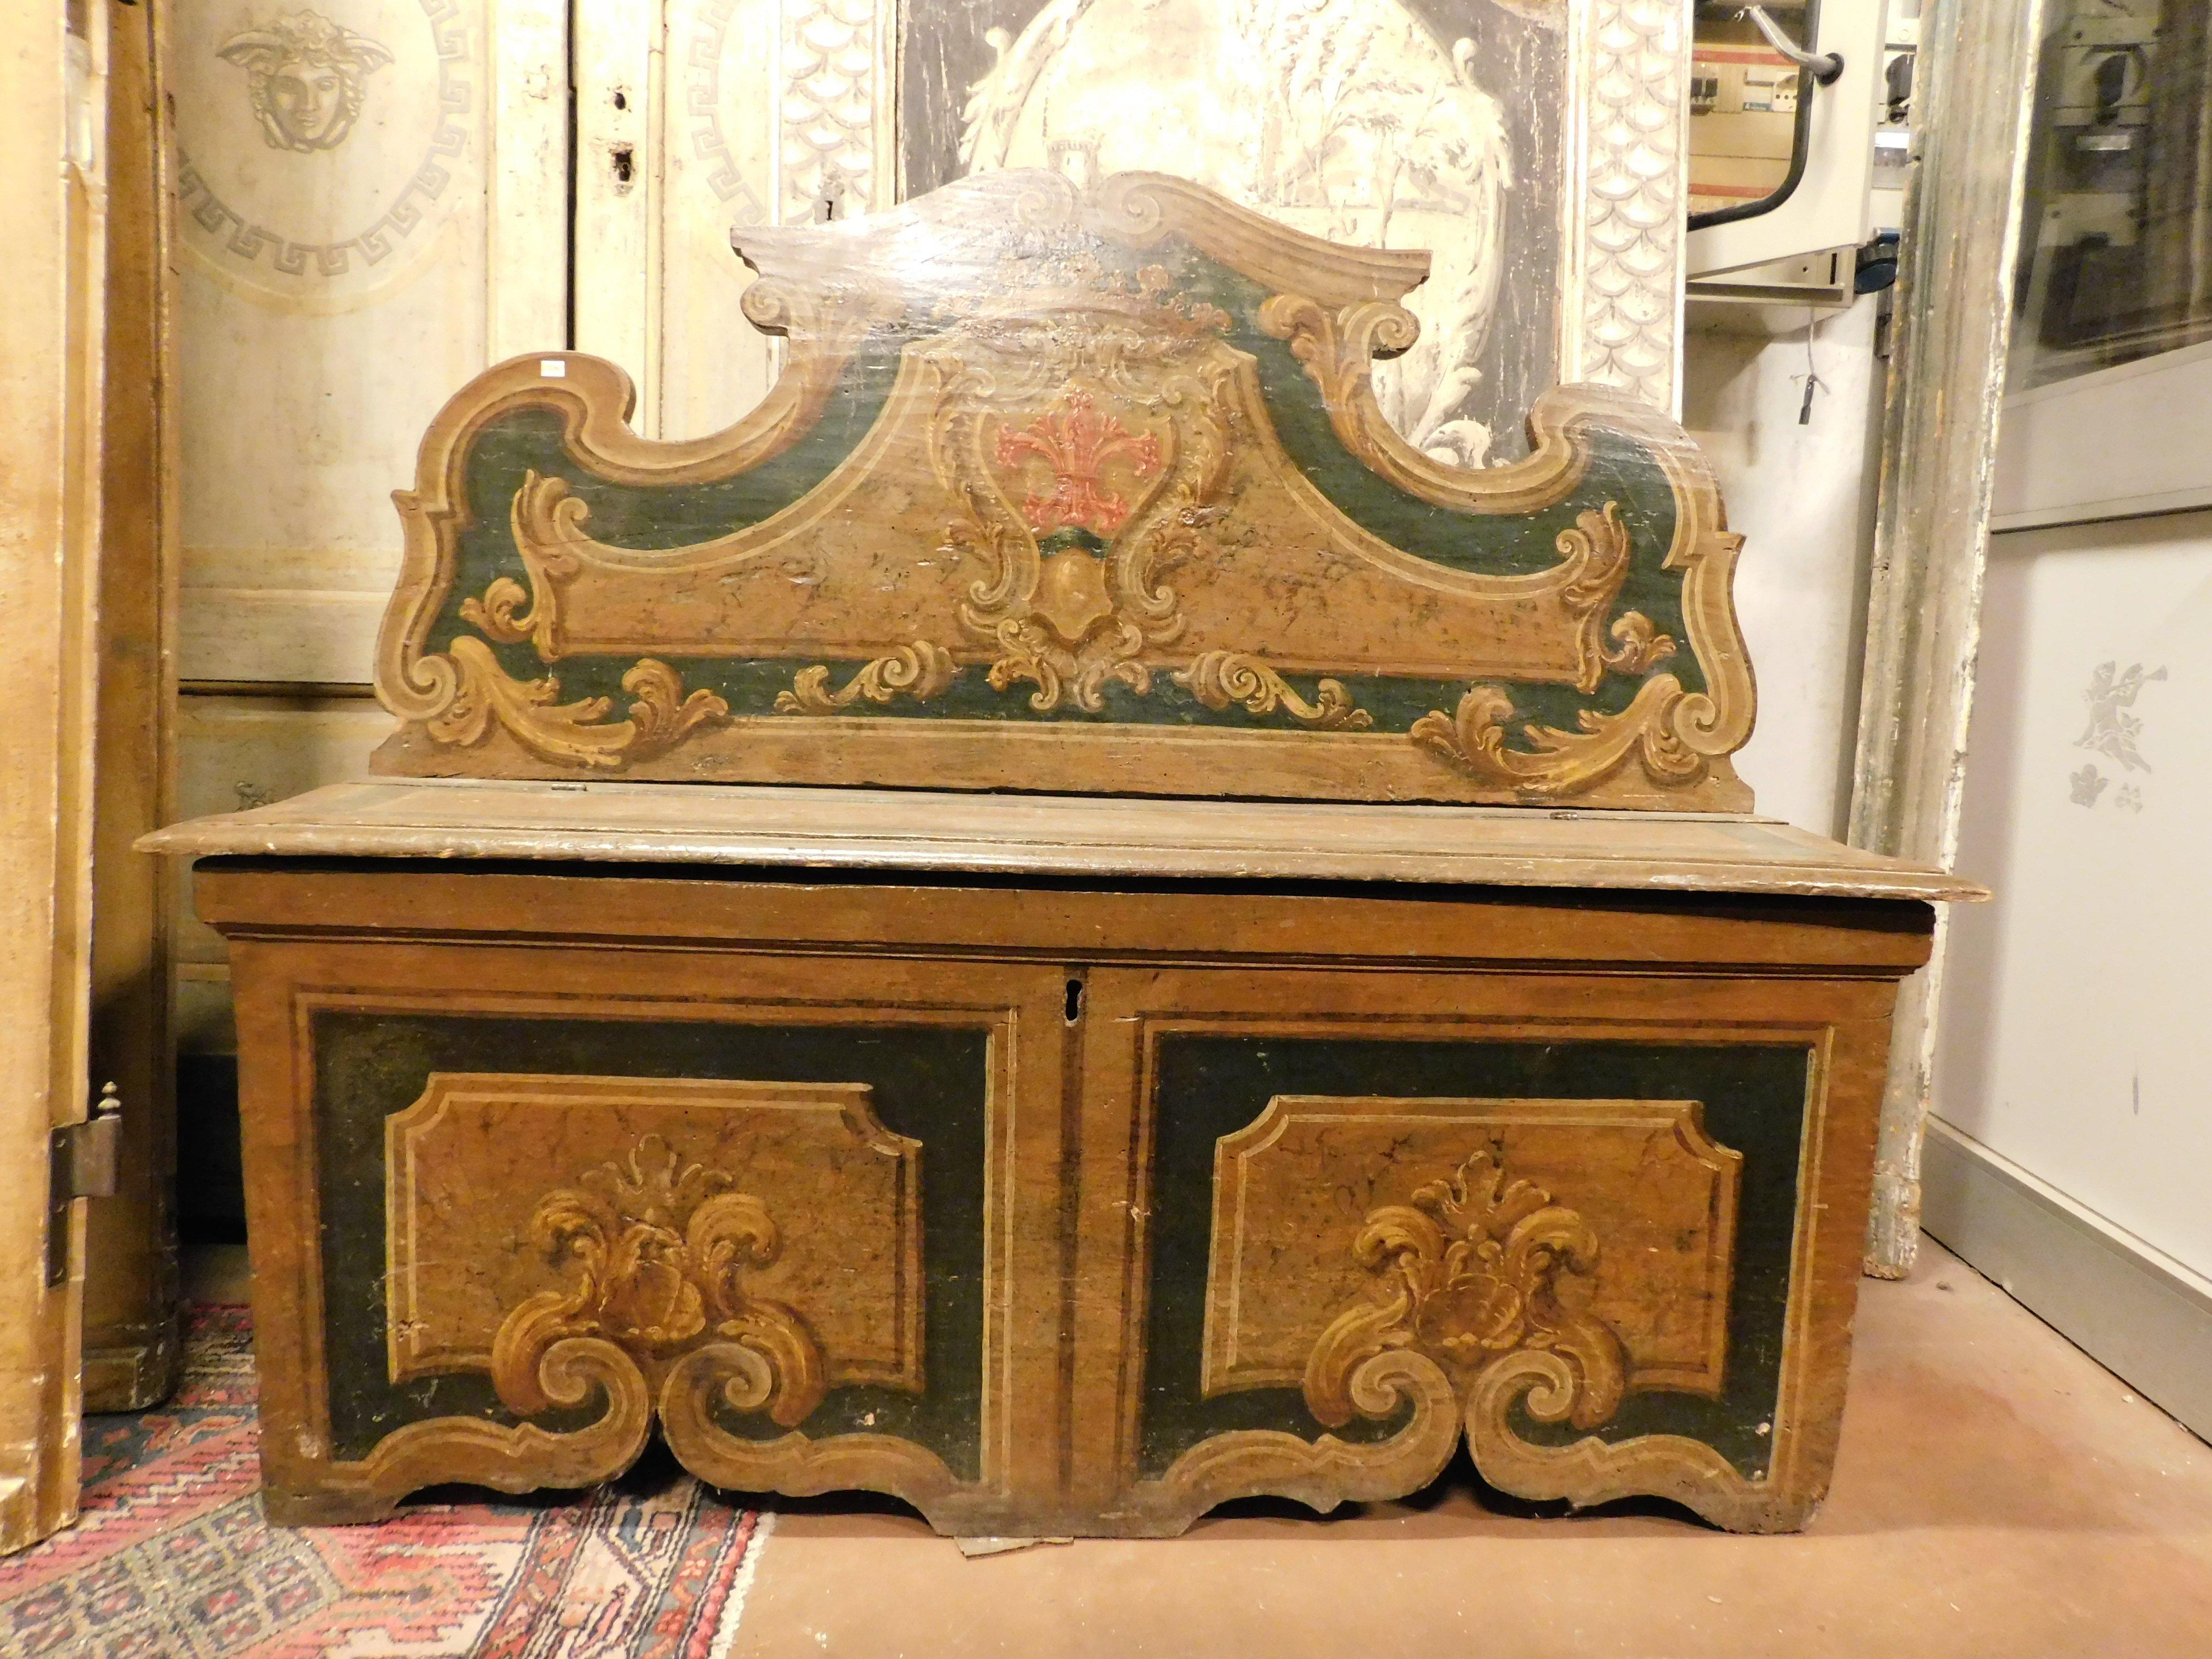 Ancient chest in solid poplar wood, lacquered and hand painted with noble coat of arms, built in Italy in the 18th century, opening seat with storage compartment and decorated stand, maximum size cm w 133 x H 113 (seat H 56 cm) x D 44